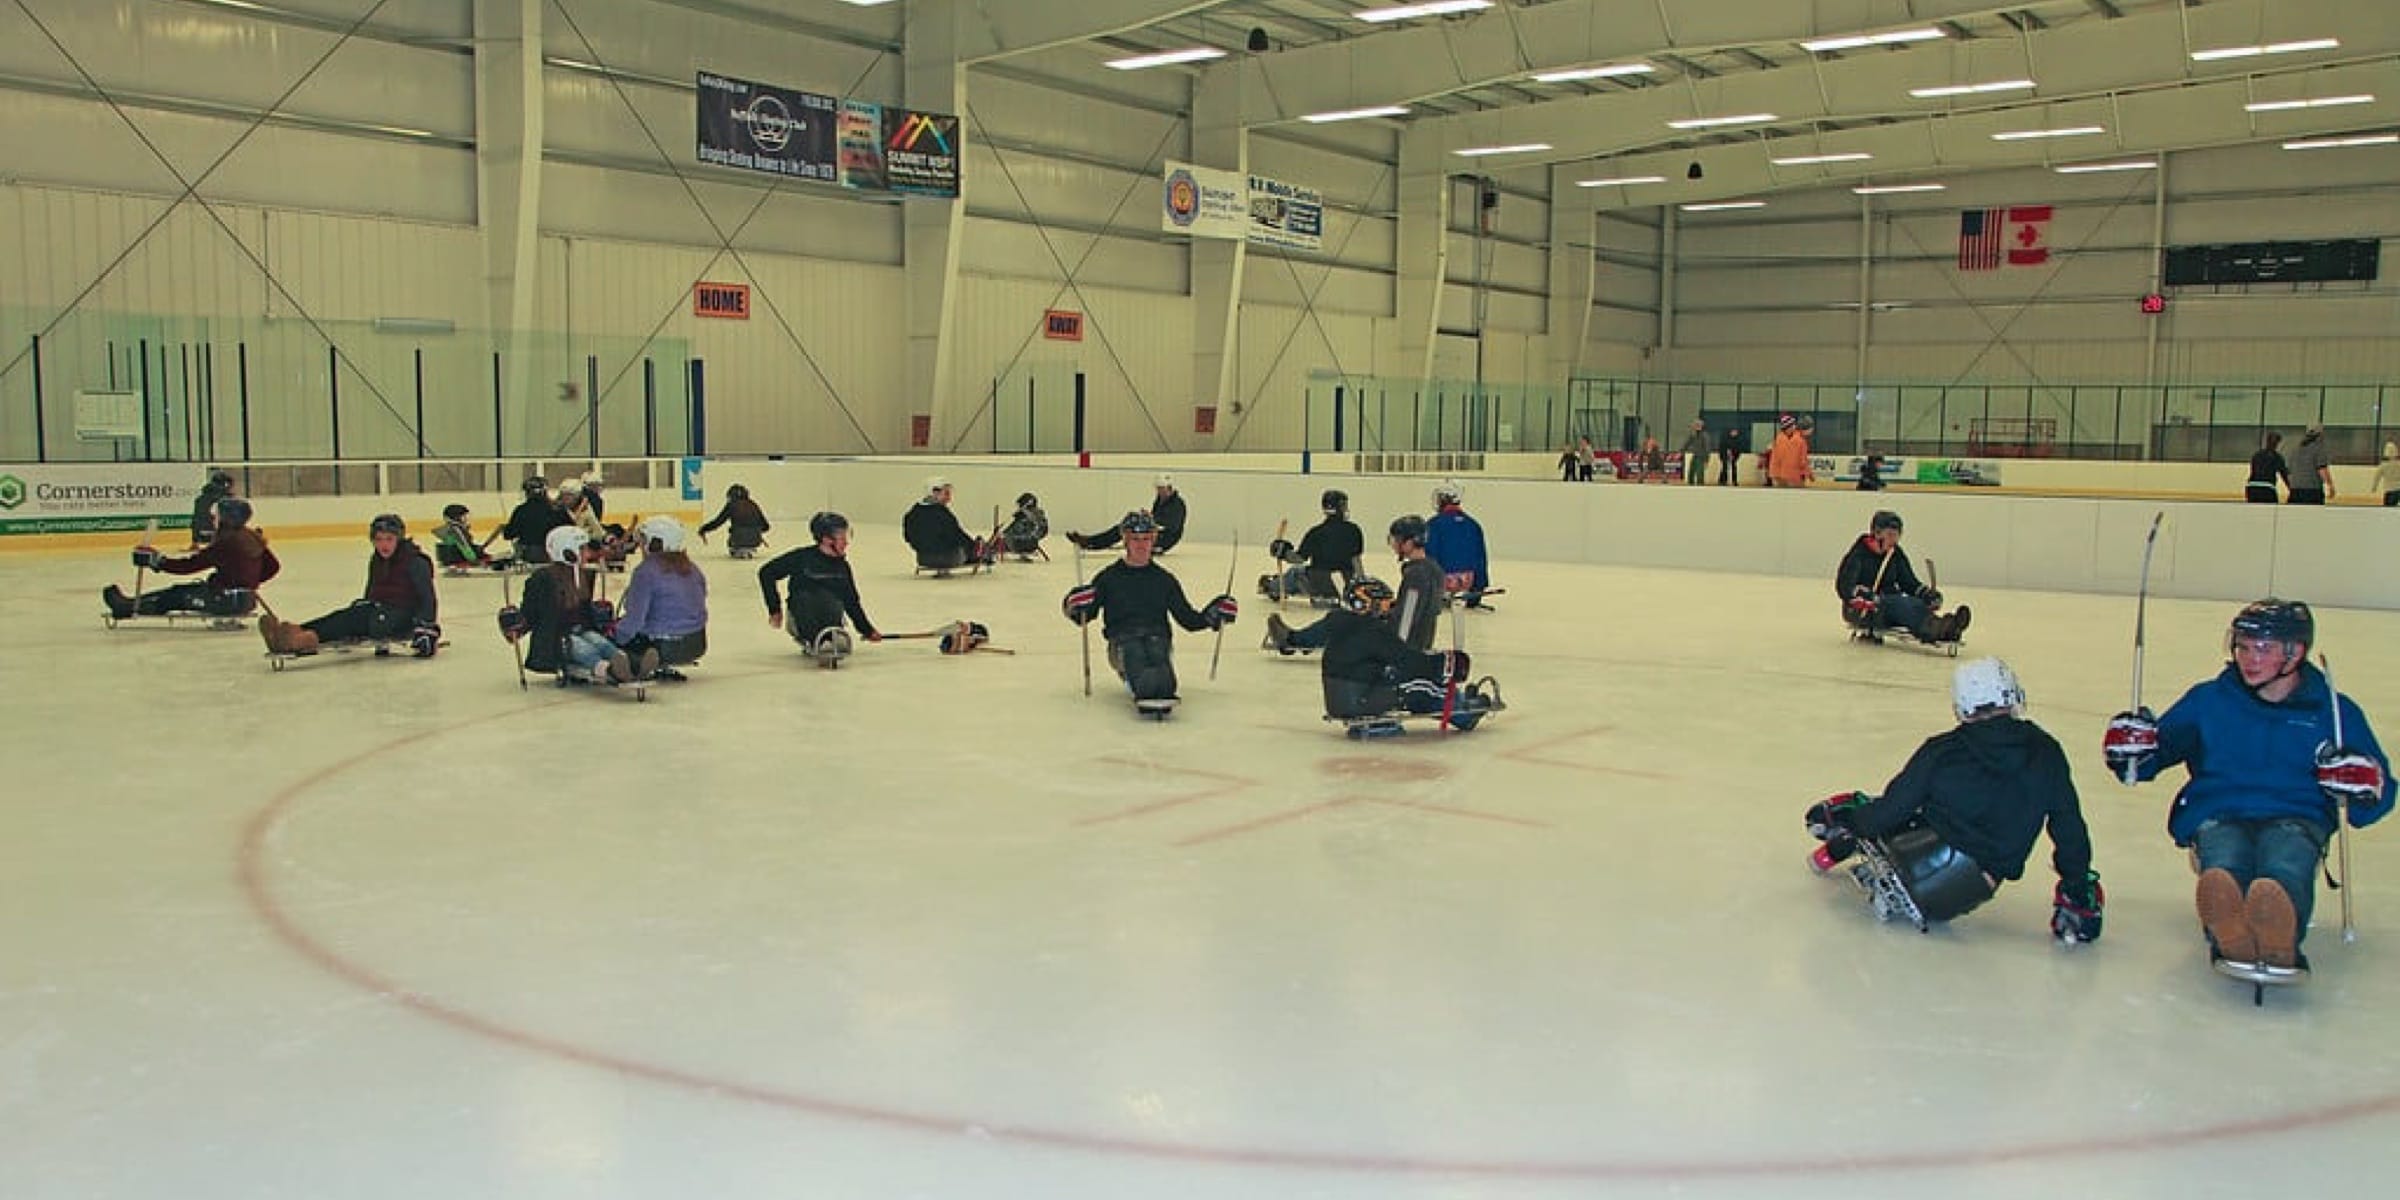 a group of people playing sled hockey